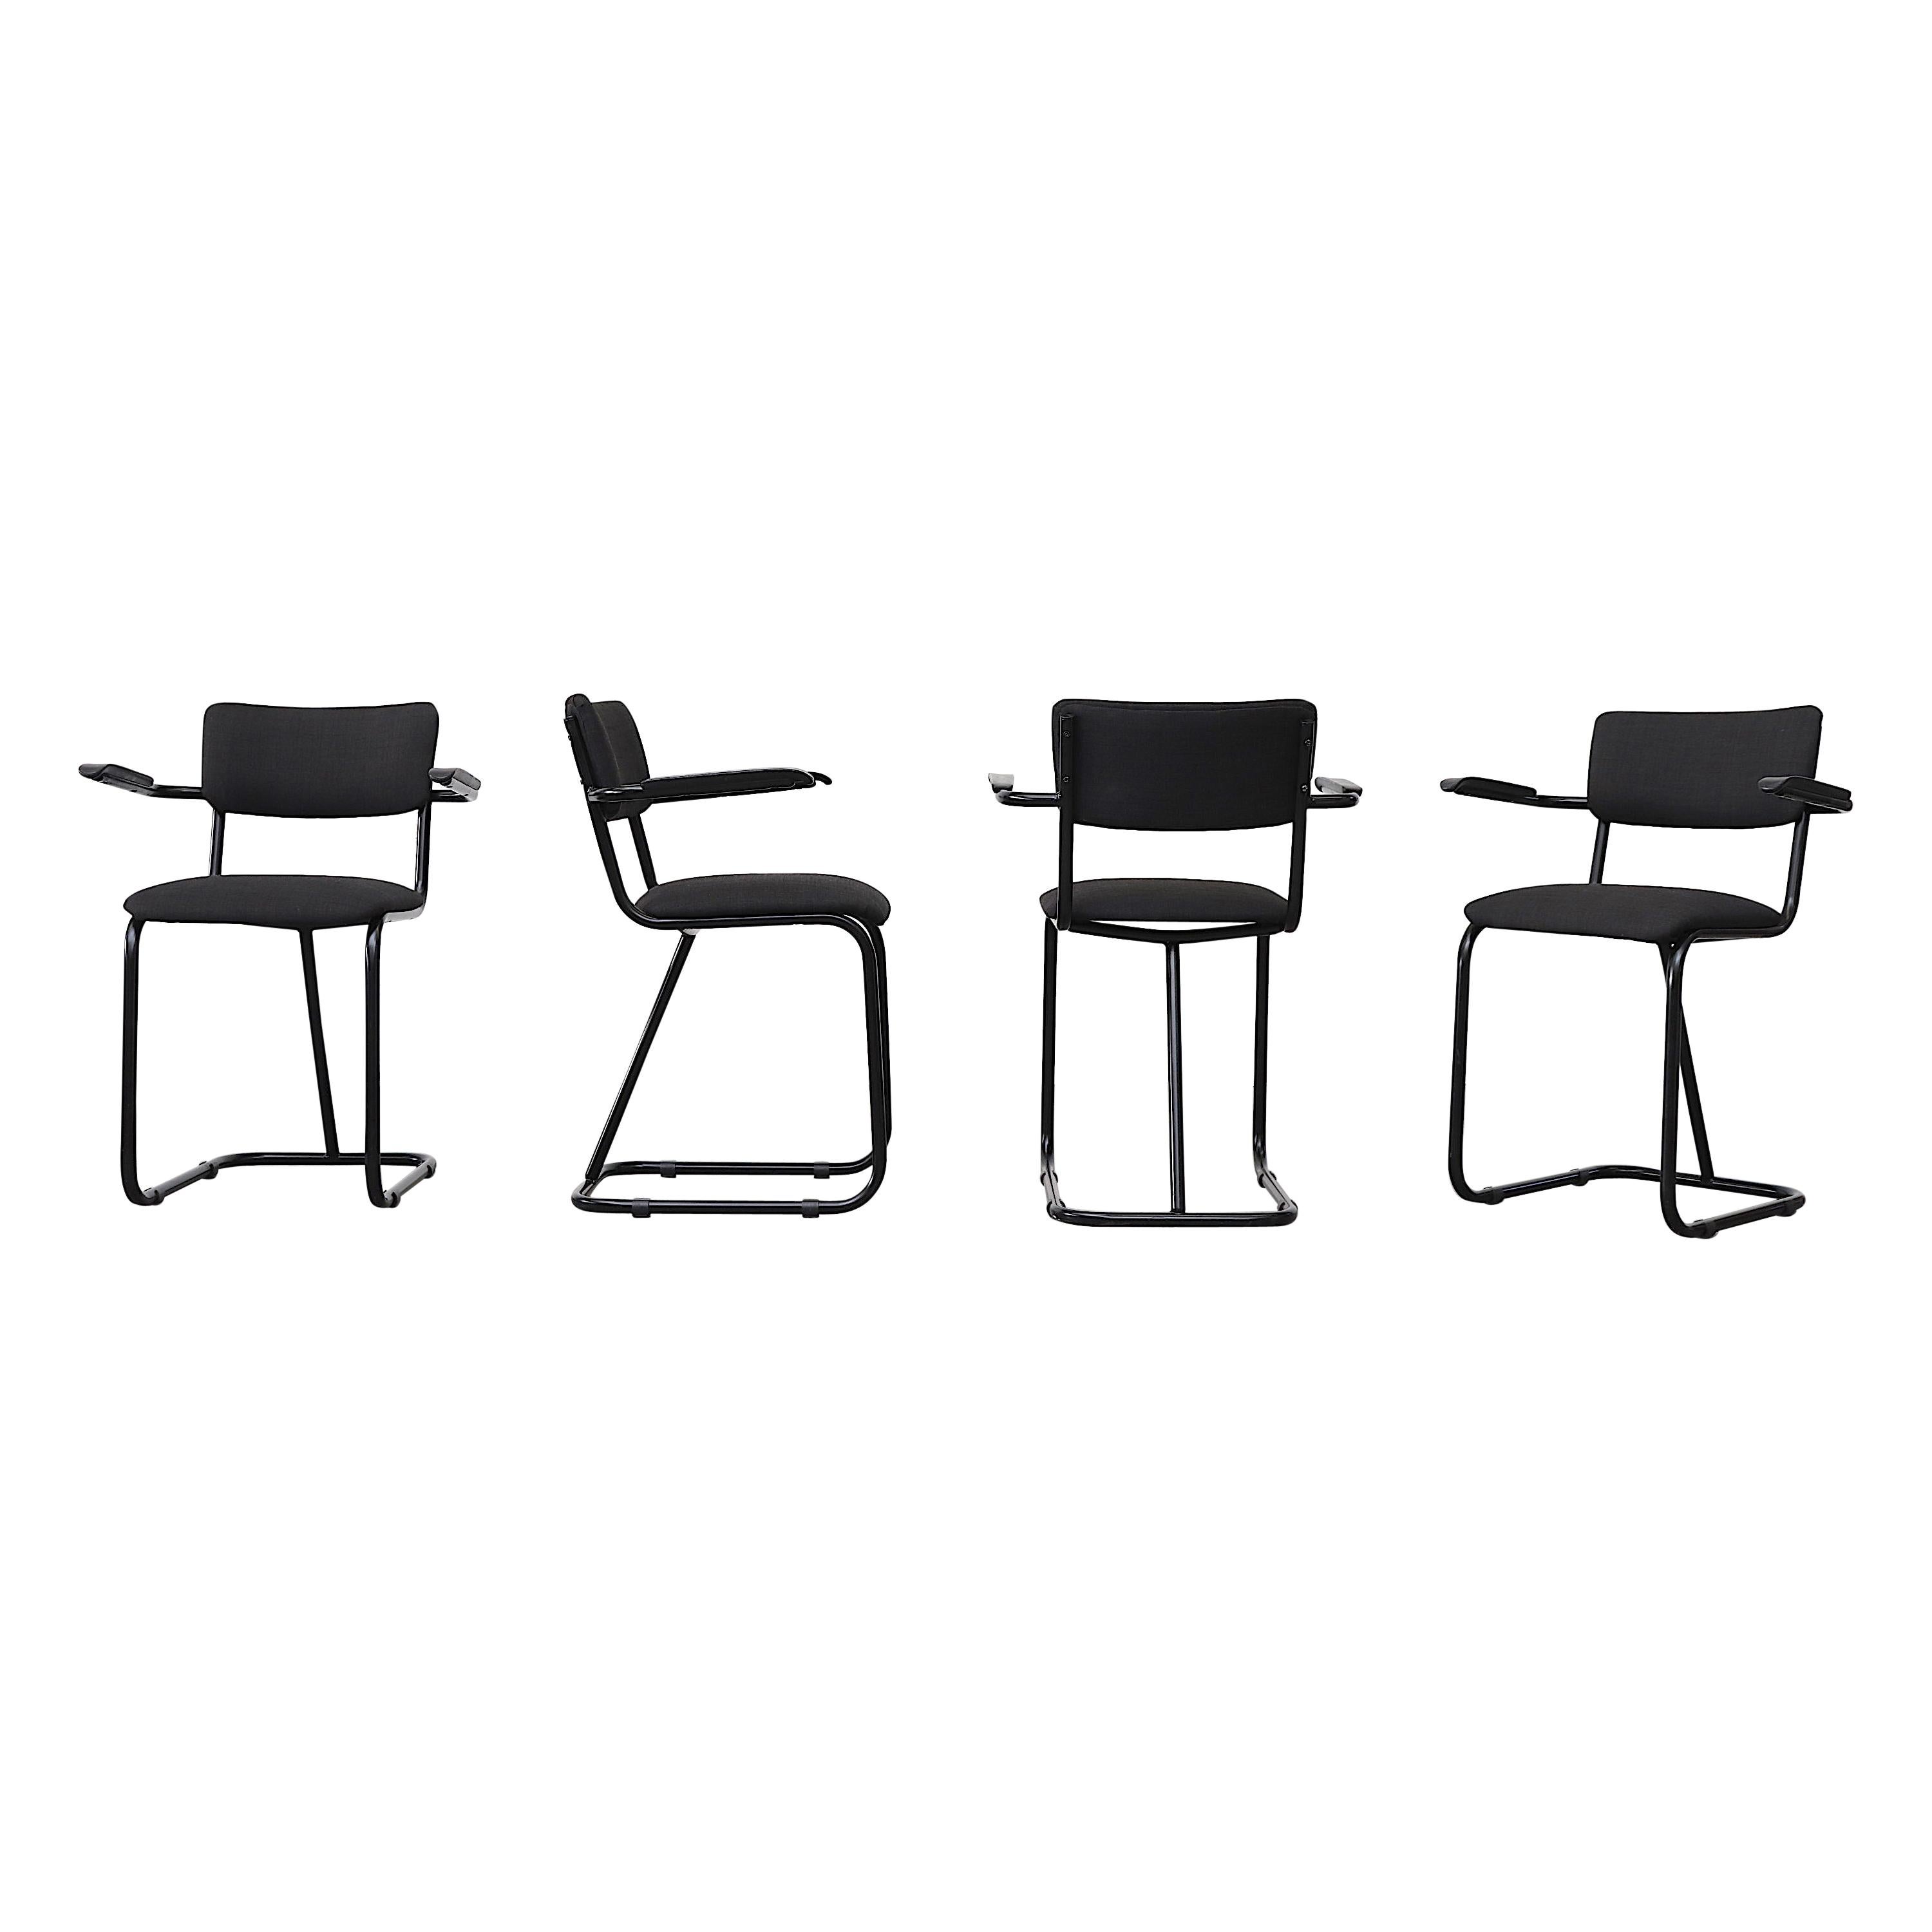 Set of 4 Fana Metaal "No. 112" Tubular Chairs with Acrylic Arm Rests